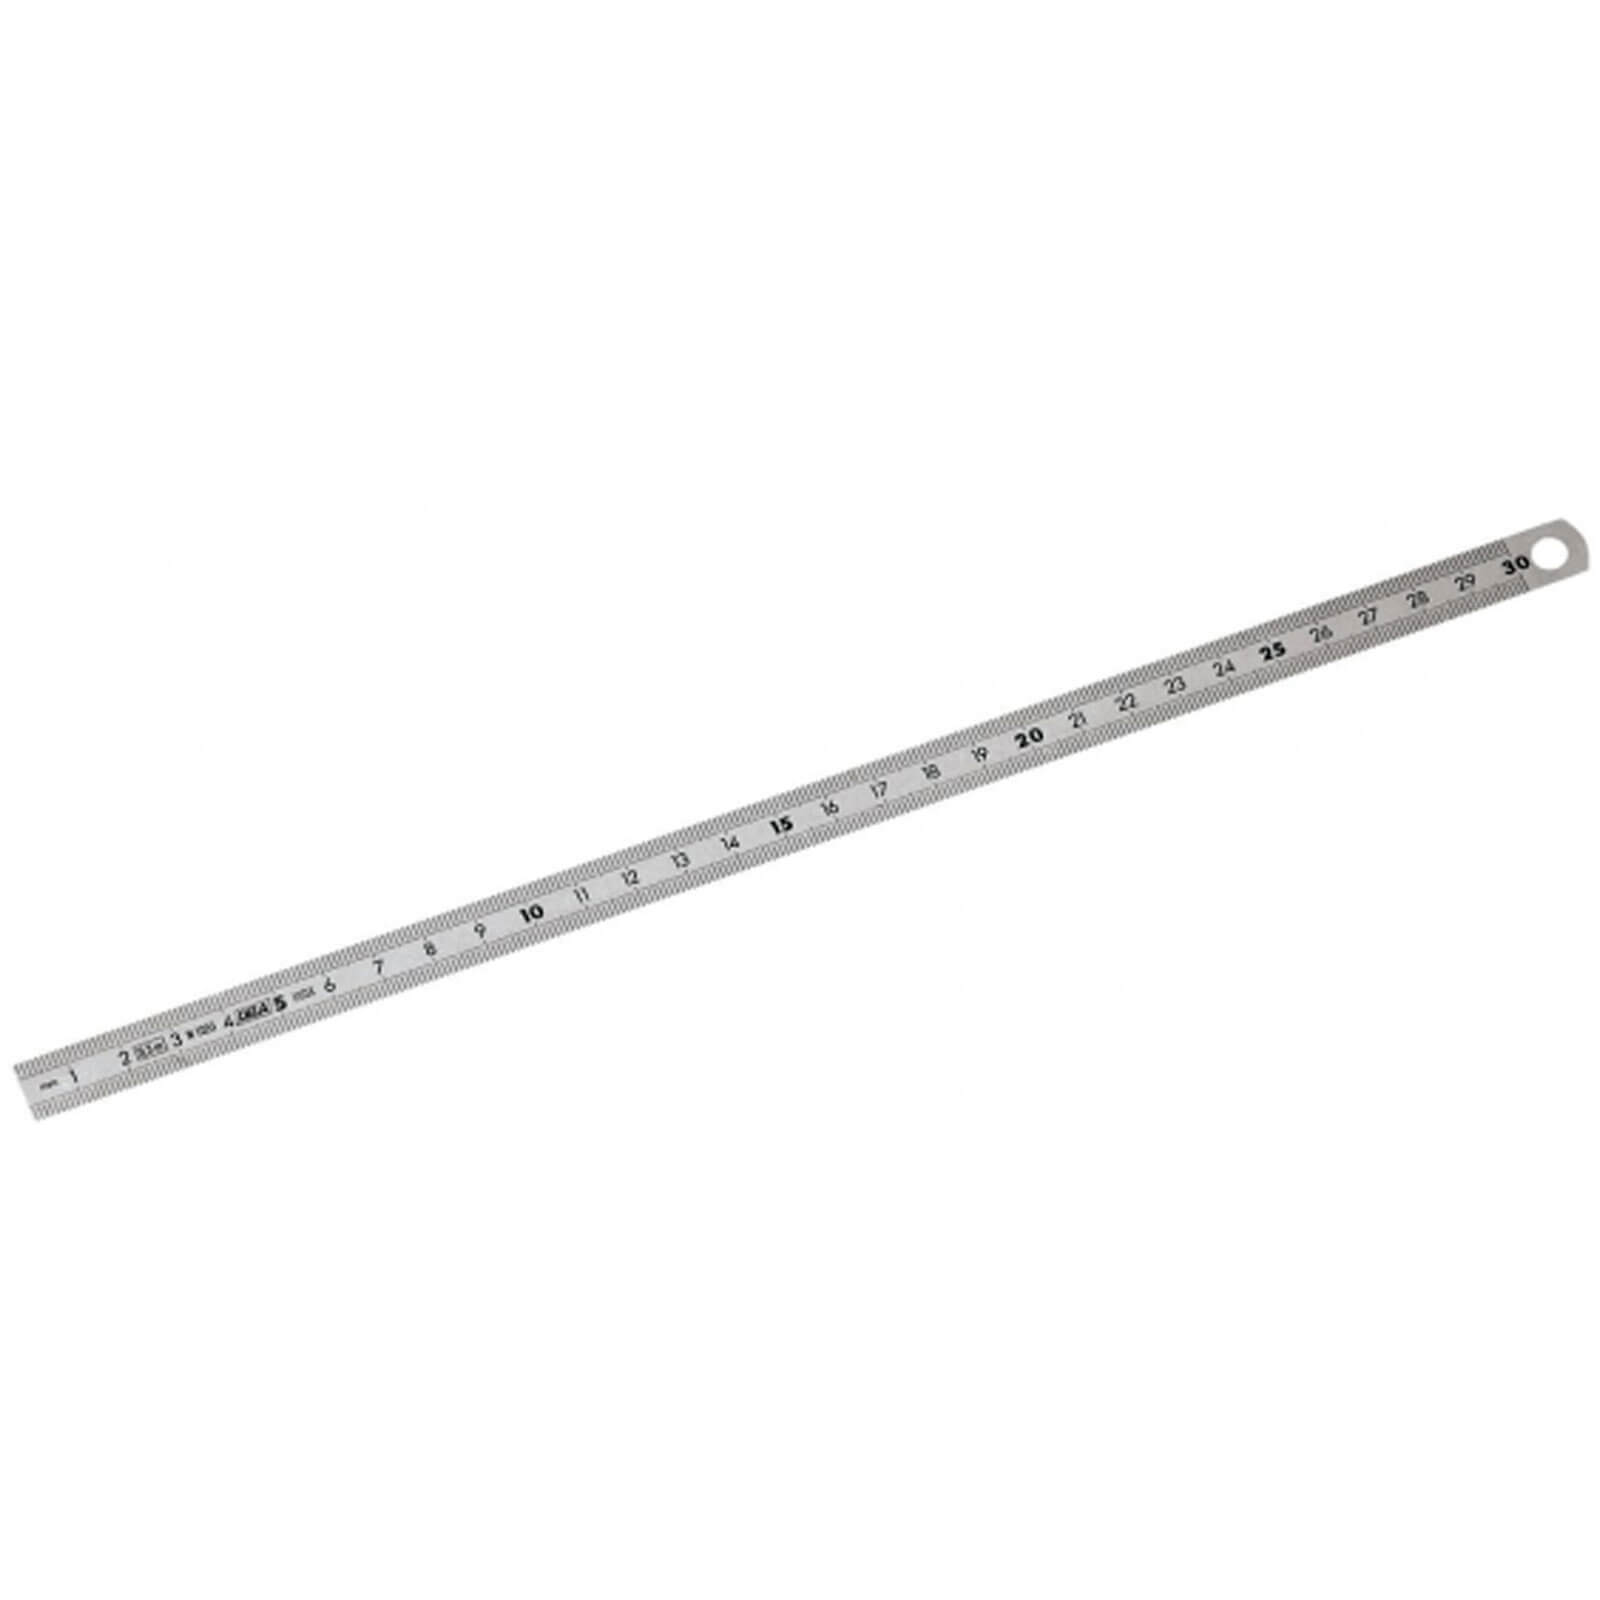 Image of Facom DELA.1051 Metric Double Sided Stainless Steel Rule 12" / 300mm